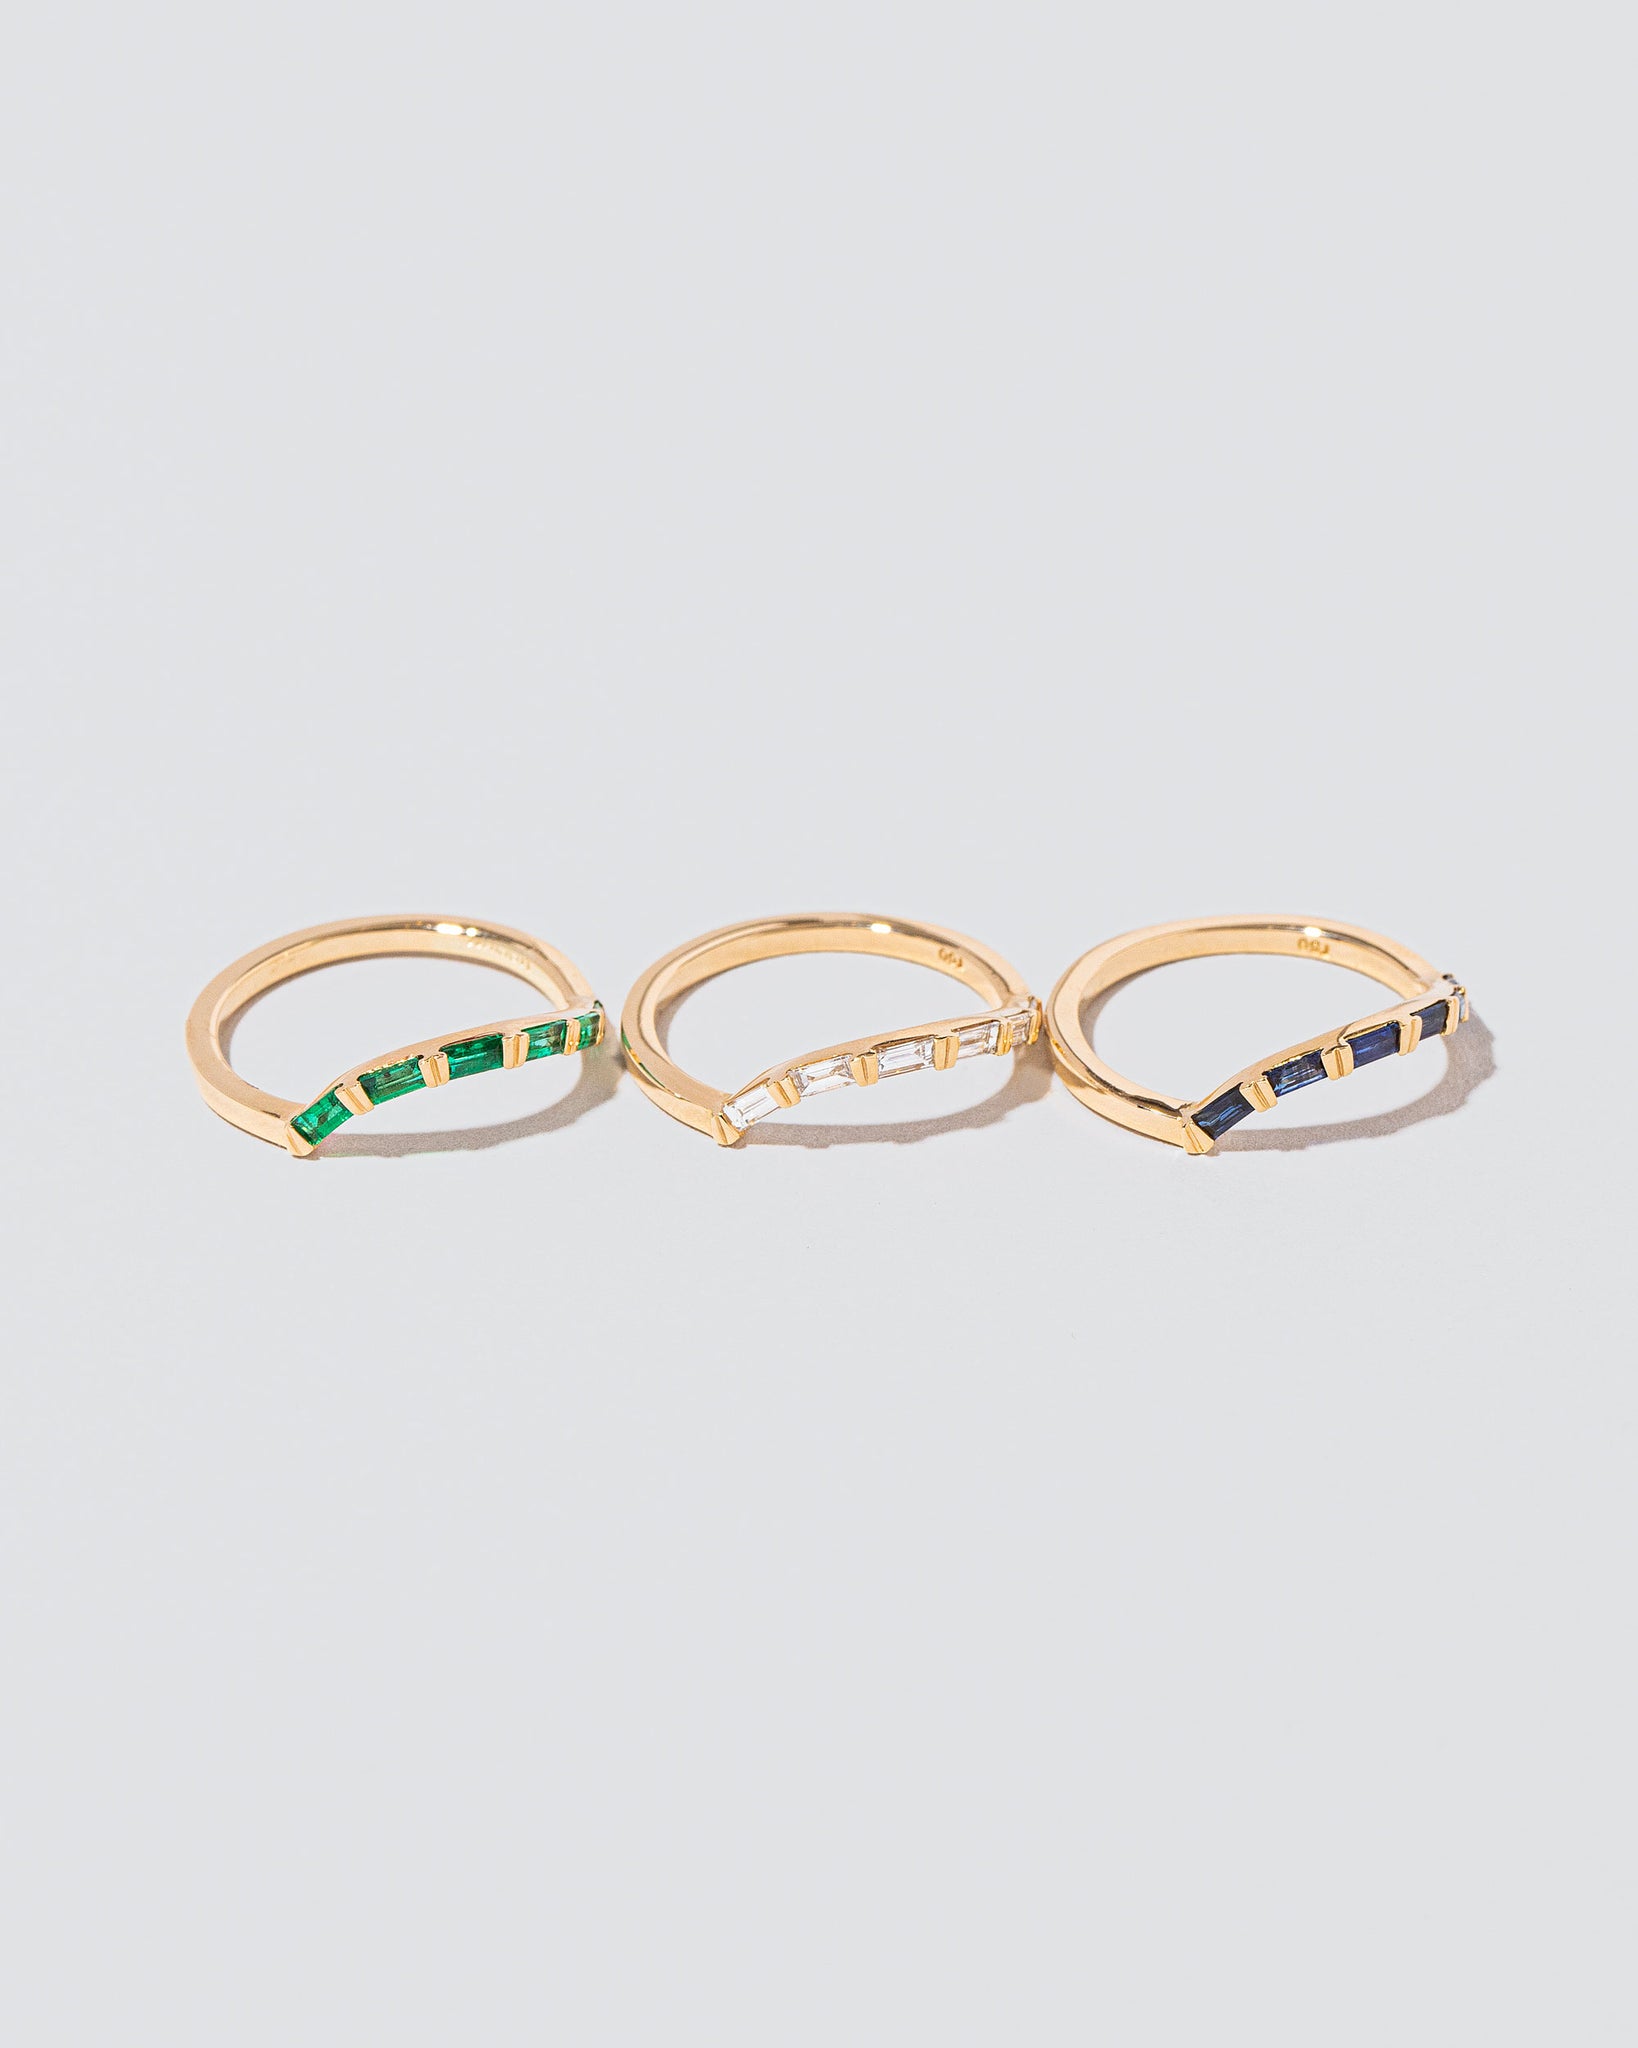 Group of Mociun Shape Collection Wedding Bands and Stacking Rings of varying styles and gemstones on light color surface.